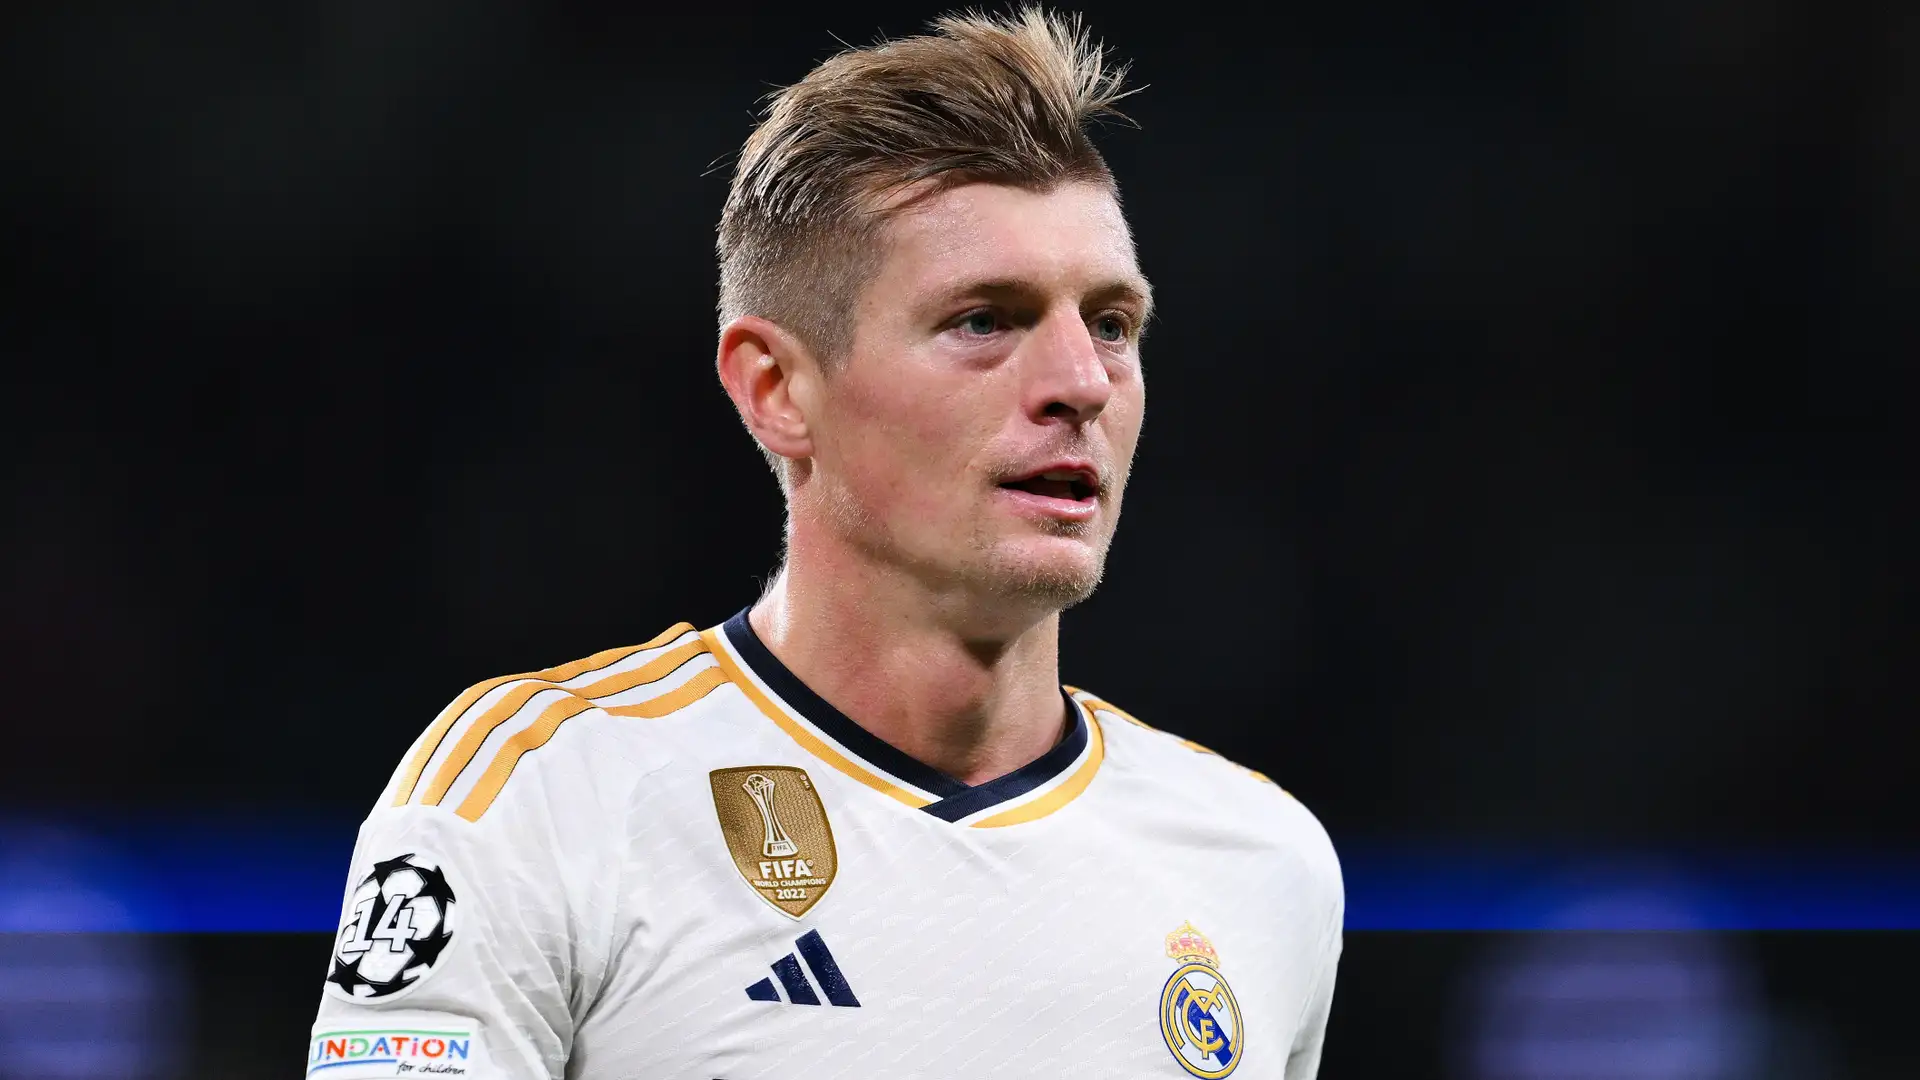 Toni Kroos is retiring! Real Madrid legend to hang up his boots after Germany's Euro 2024 campaign